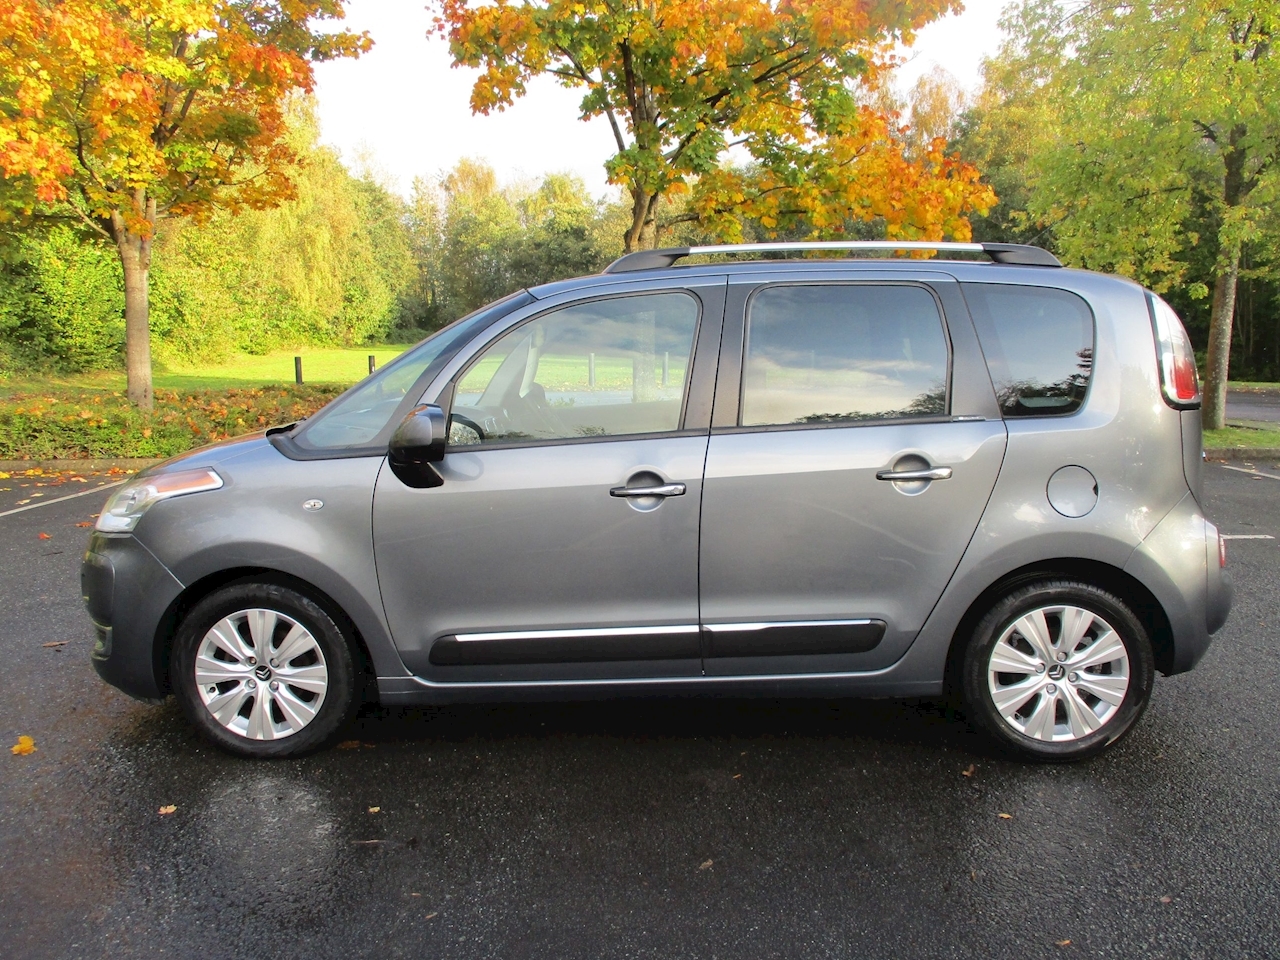 C3 Picasso Exclusive MPV 1.6 Manual Diesel